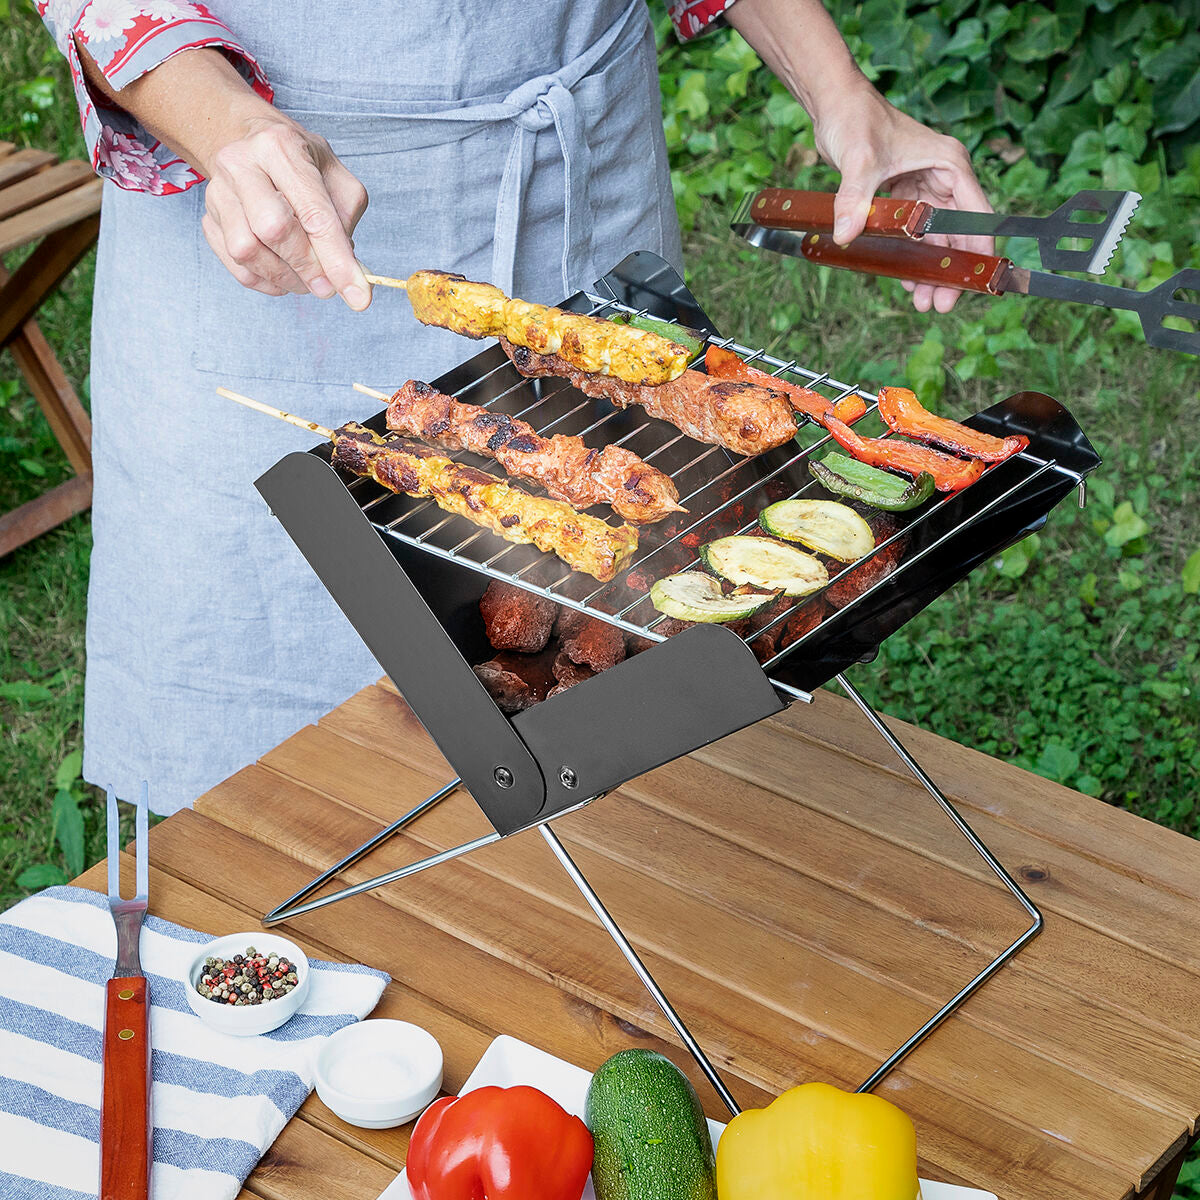 Portable charcoal barbecue